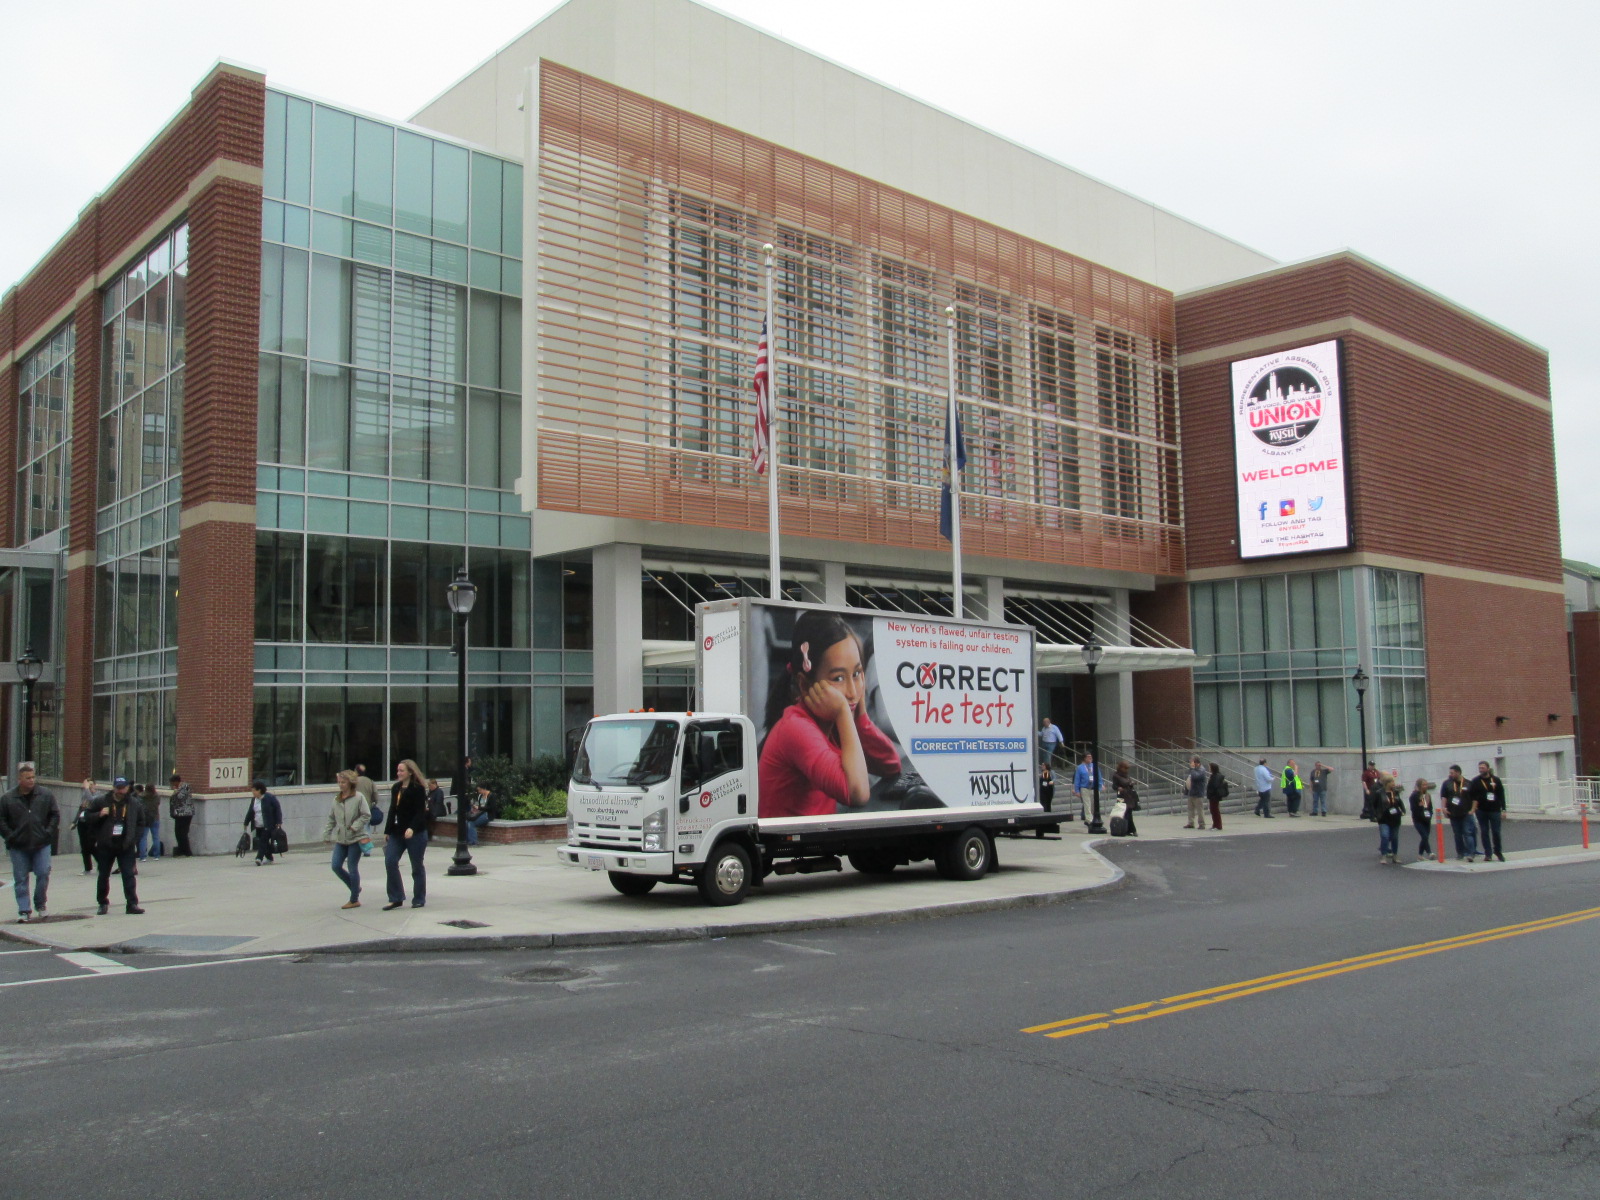 Mobile billboard for NYSUT 2019 Annual Convention Albany NY